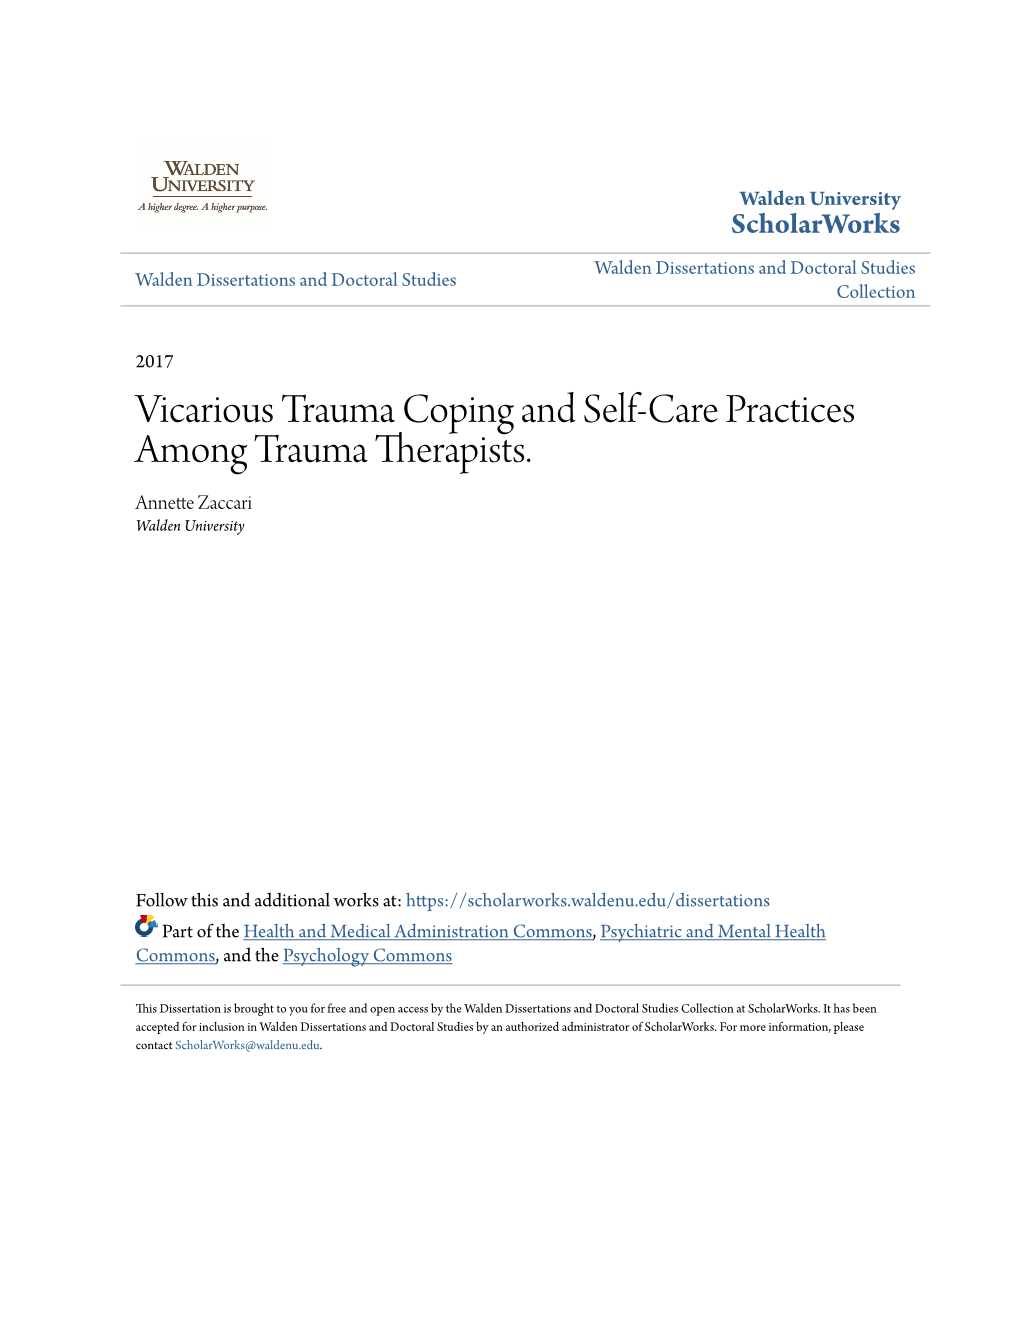 Vicarious Trauma Coping and Self-Care Practices Among Trauma Therapists. Annette Zaccari Walden University